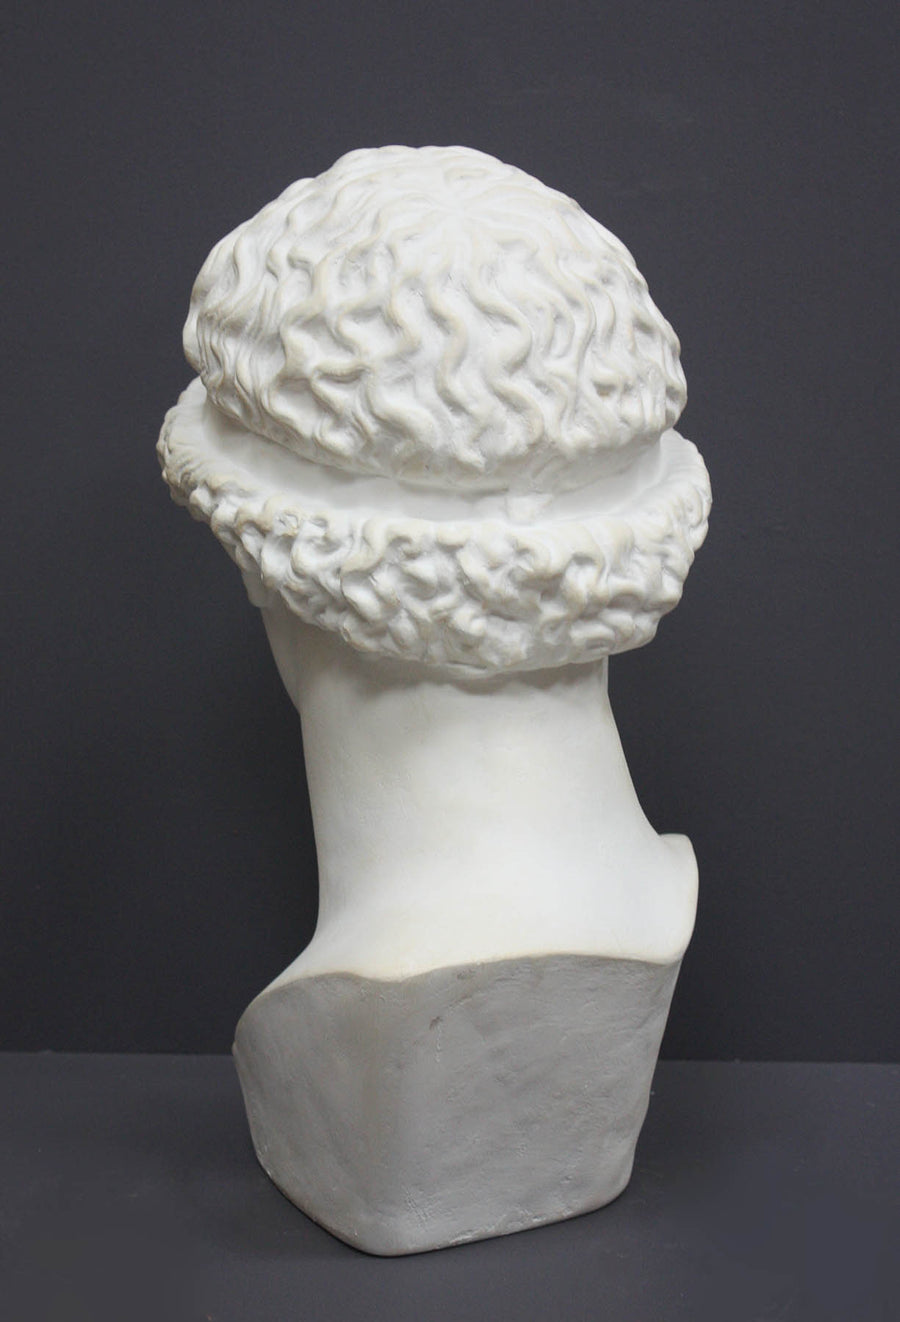 back view photo of white plaster cast sculpture bust of female, namely the goddess Athena, with short, curly hair and headband on gray background